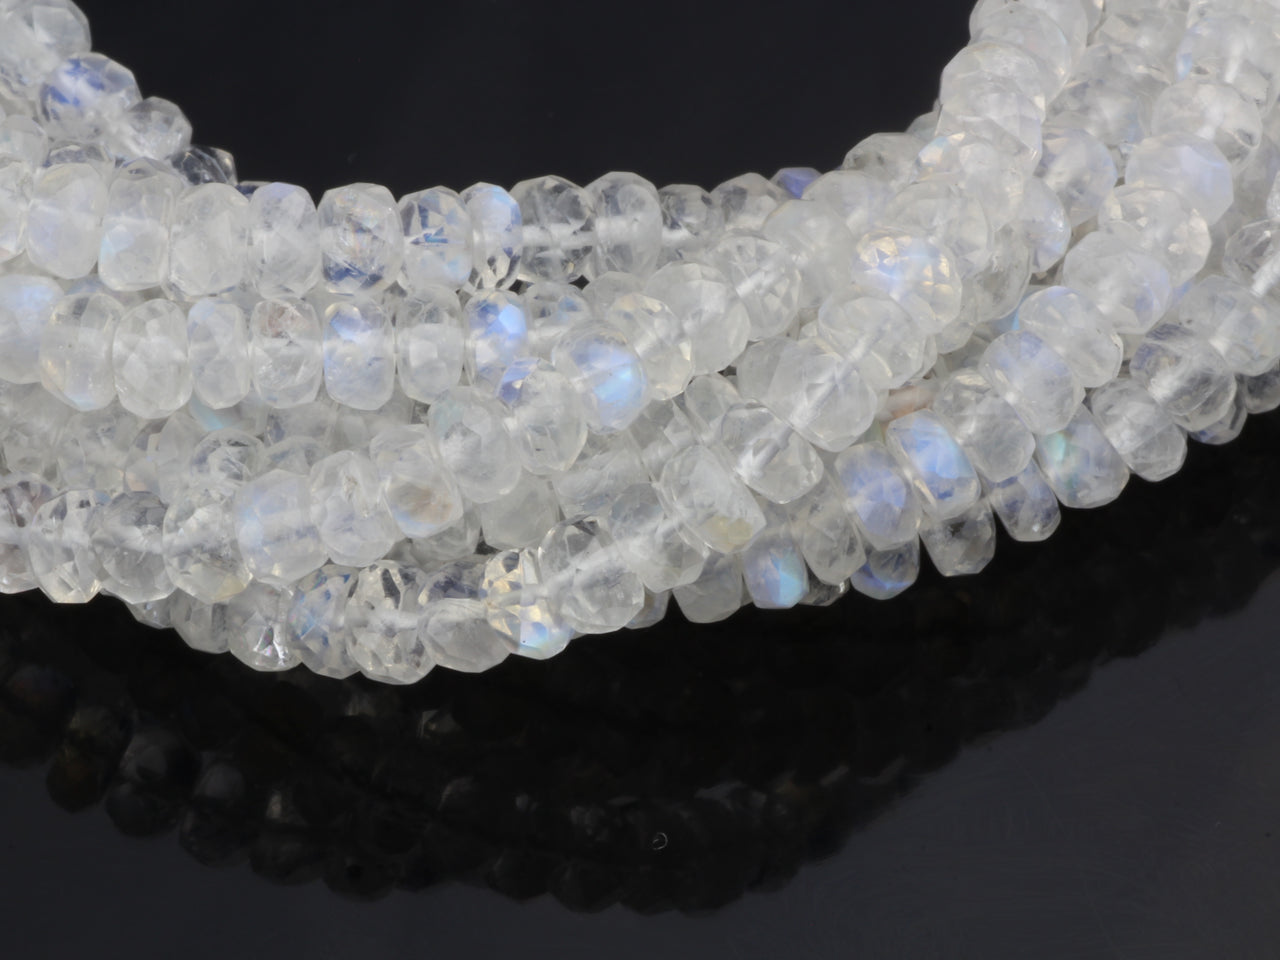 AA Rainbow Moonstone 4mm Hand Faceted Rondelles Bead Strand